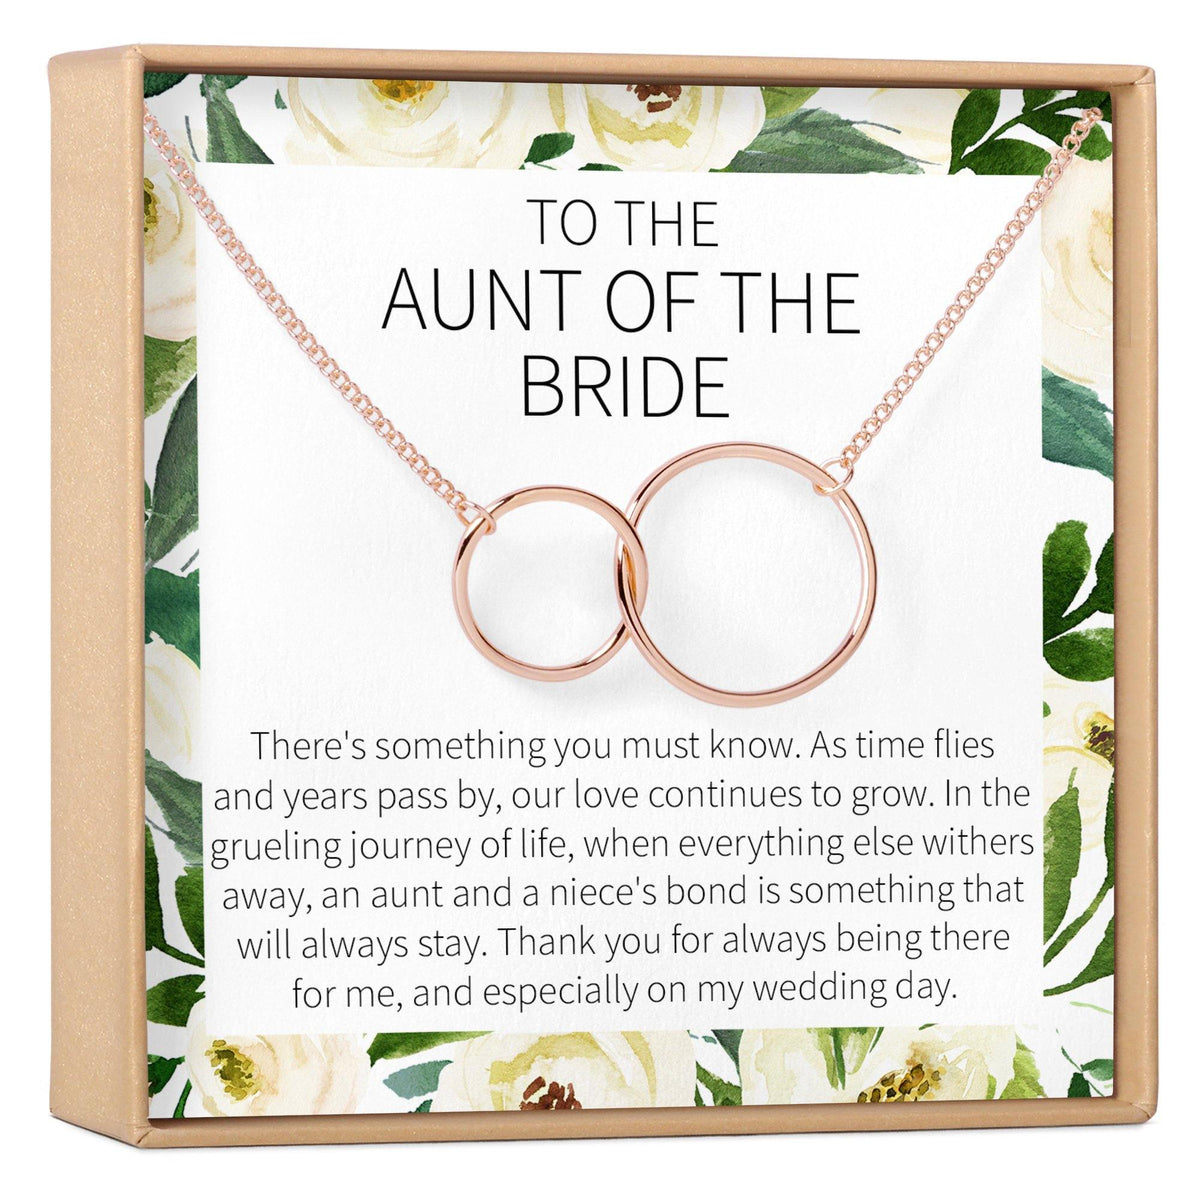 Aunt of the Bride Necklace - Dear Ava, Jewelry / Necklaces / Pendants